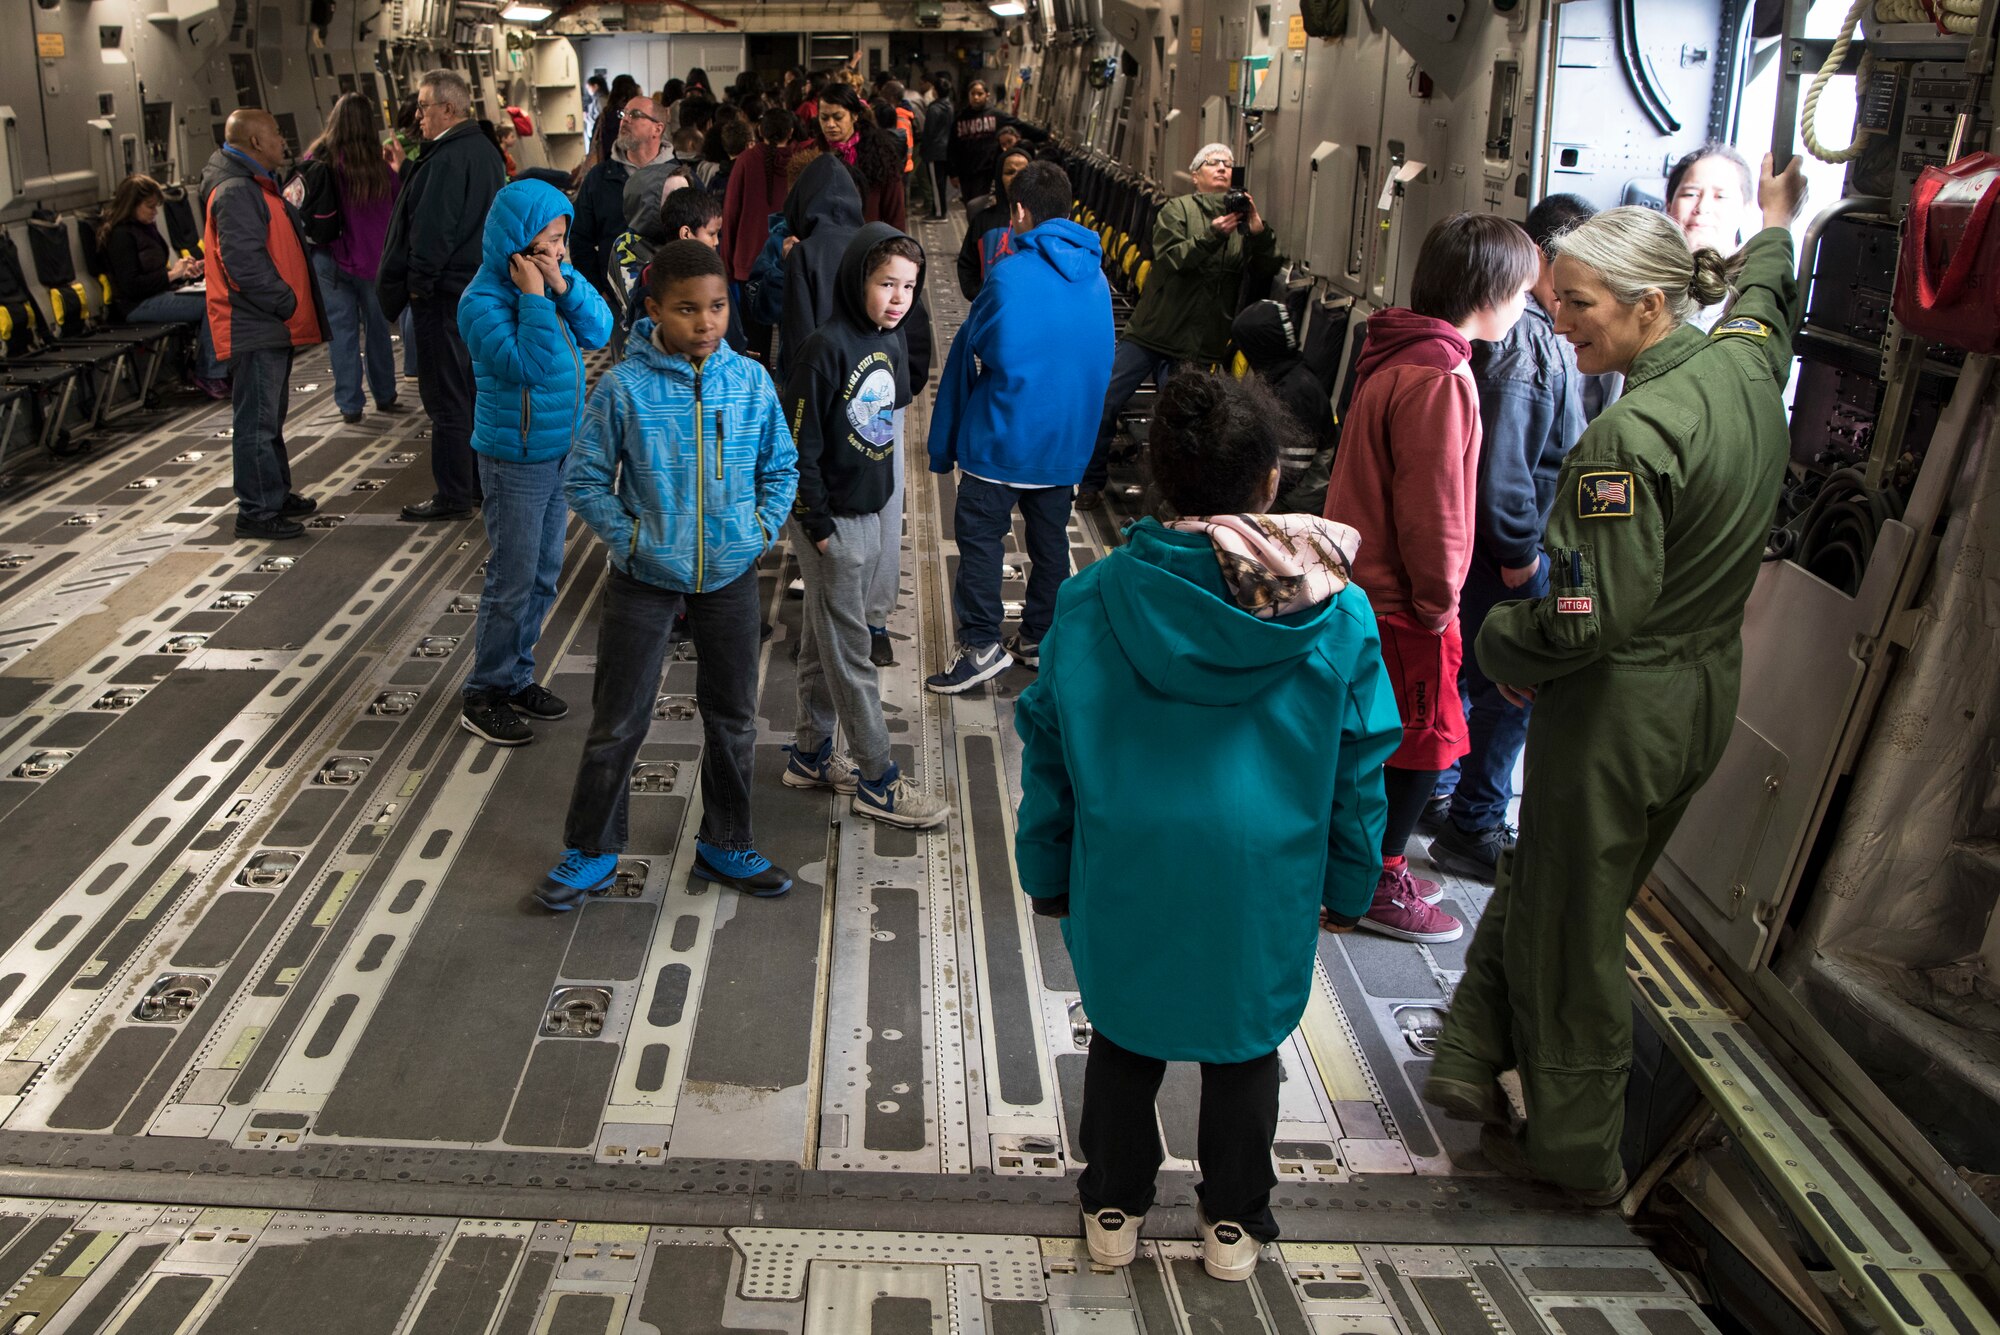 Students in 5th-grade from Wonder Park and Mountain View elementary schools interact with C-17 Globemaster III aircrew at the “Day in the Life of Airmen” tour on Joint Base Elmendorf-Richardson, Alaska, May 4, 2018. Subject-matter experts led the students through displays of a C-17 Globemaster III, F-22 Raptor, Aerospace Ground Equipment and more. The tour included a pilot, loadmaster, crew chief and several other SMEs to speak about the displays.